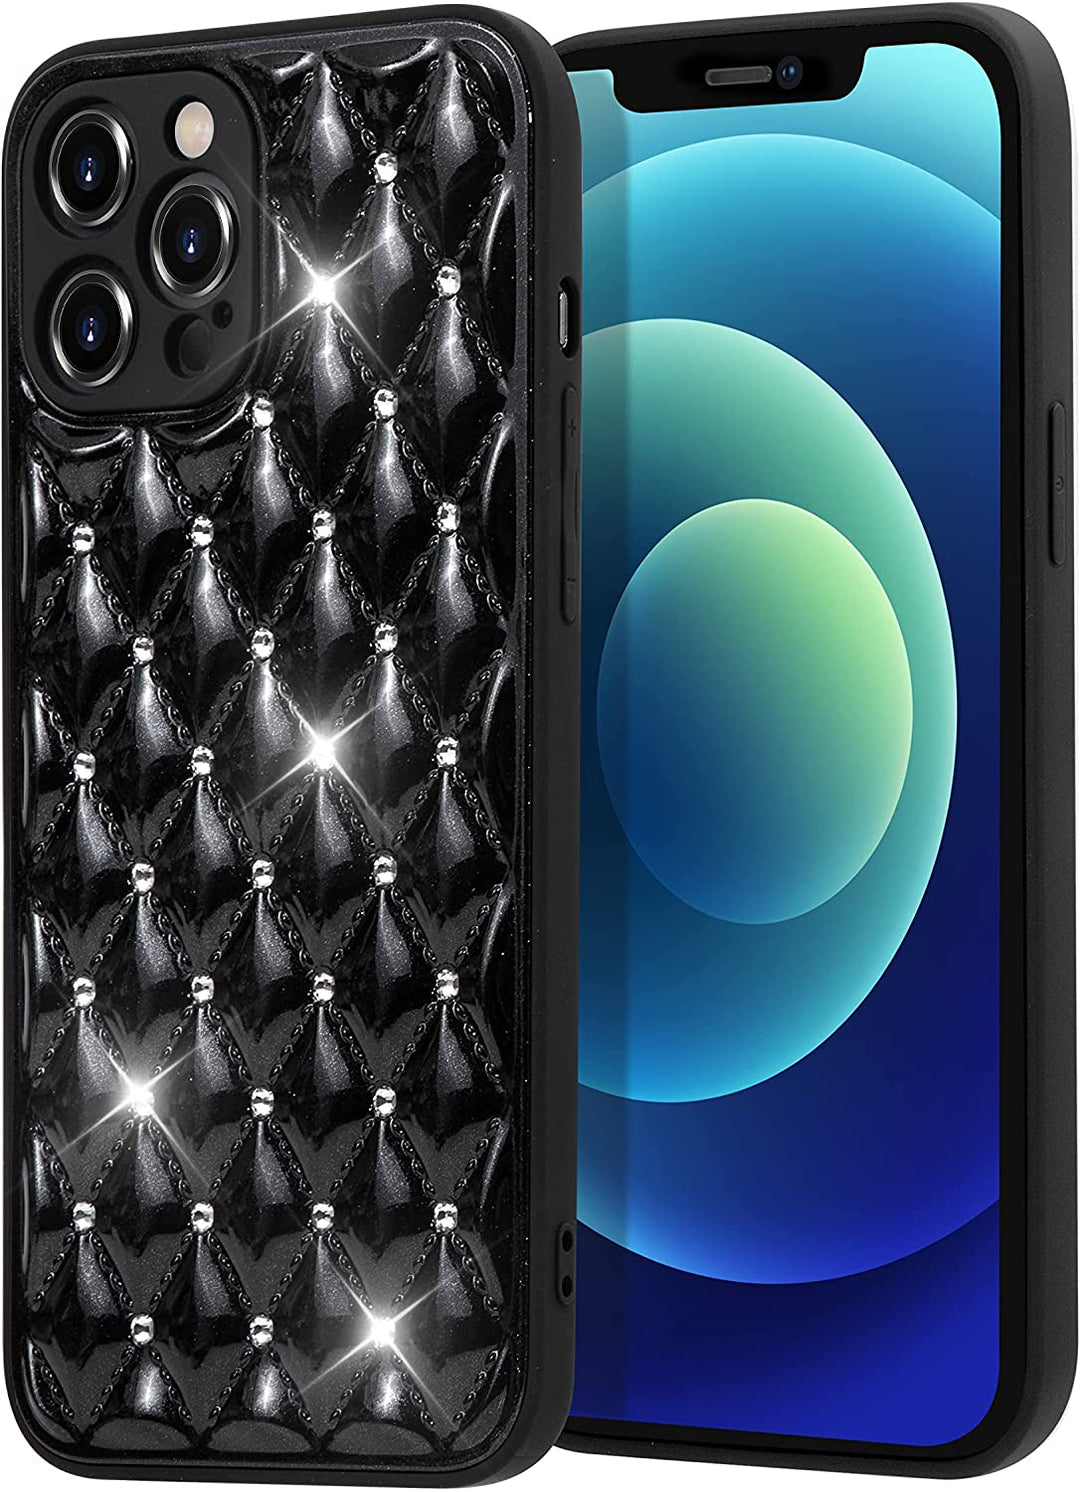 A black, glossy, TPU iPhone 12 Pro Max case. The back is designed with interlocking diamond patterns. At each intersection of the diamonds are studded with faux diamonds. #color_black